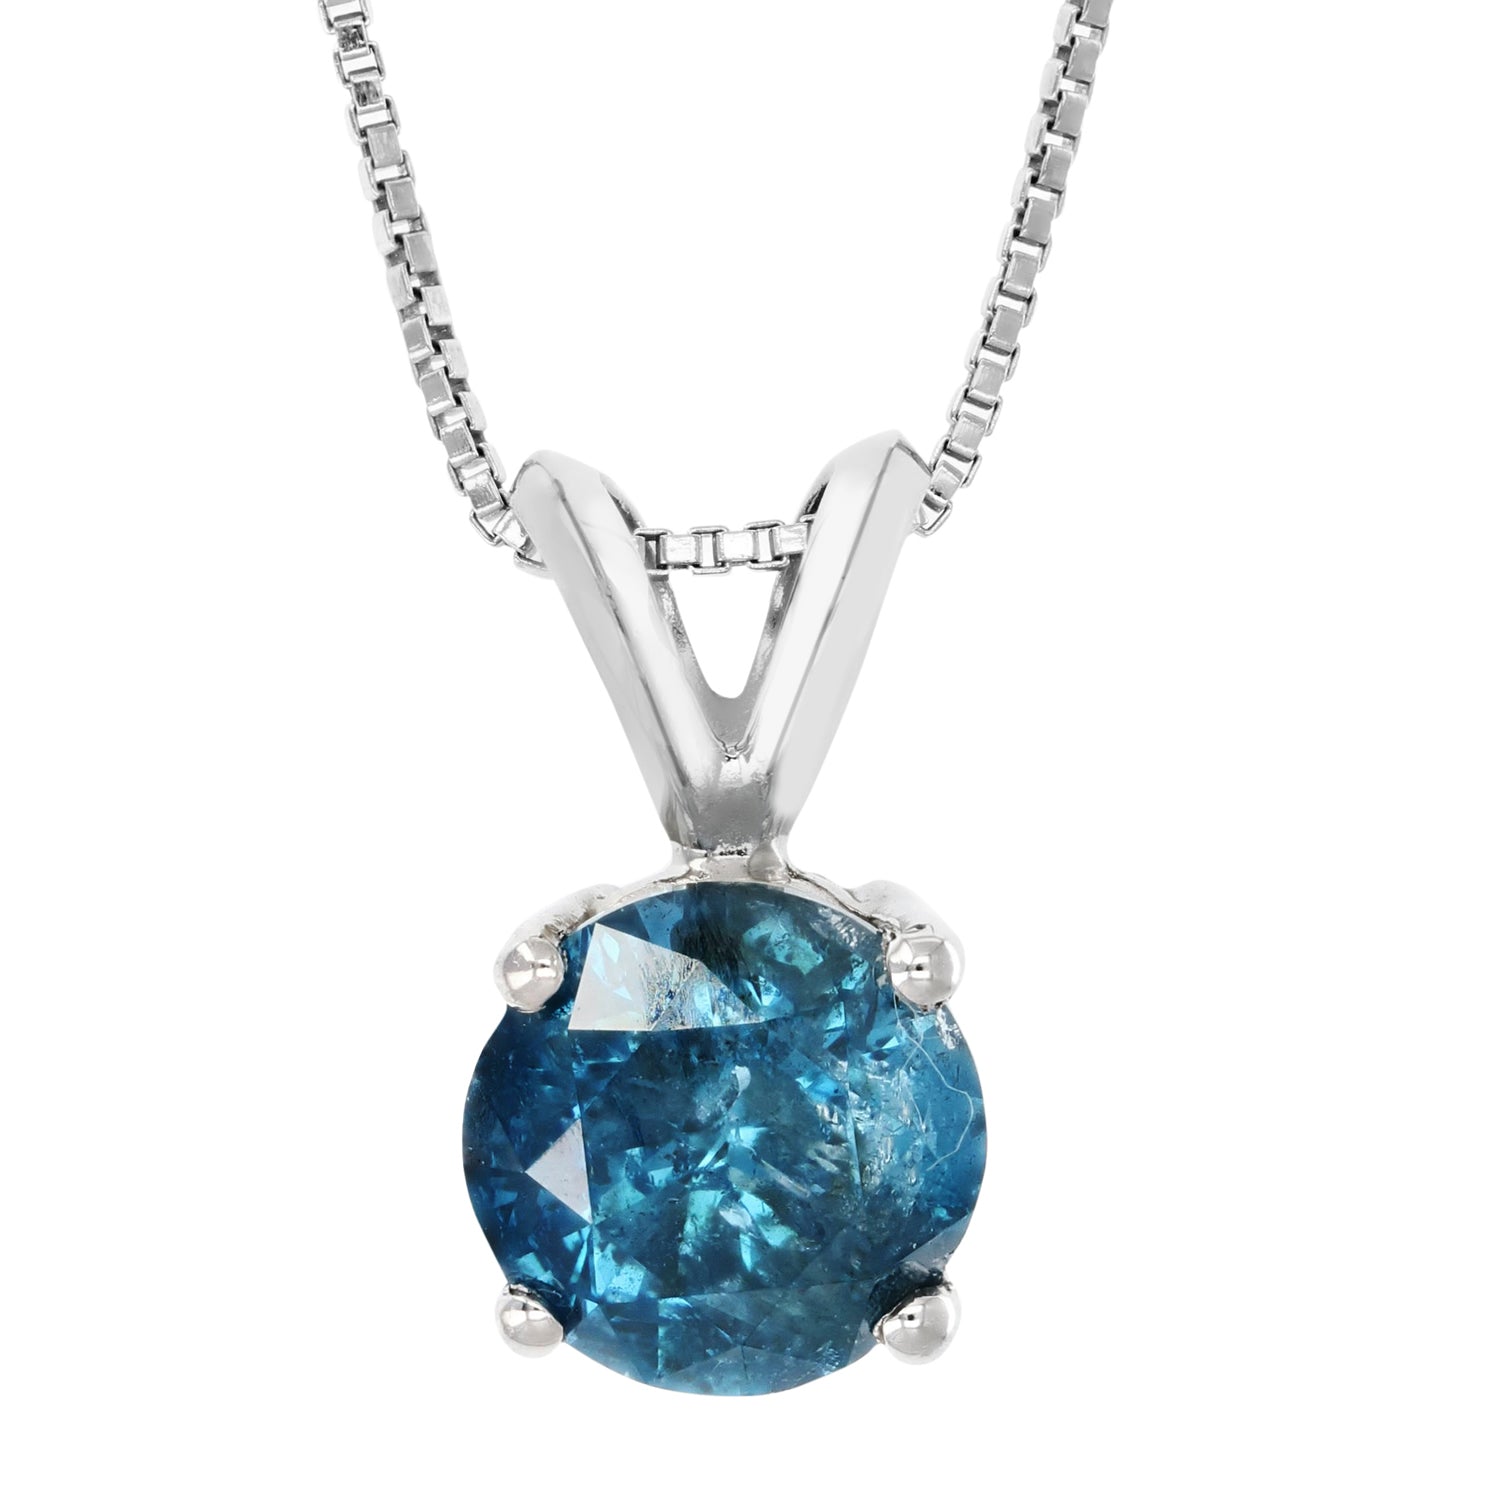 2.60 cttw Blue Diamond Solitaire Pendant Necklace 14K White Gold Round and Chain